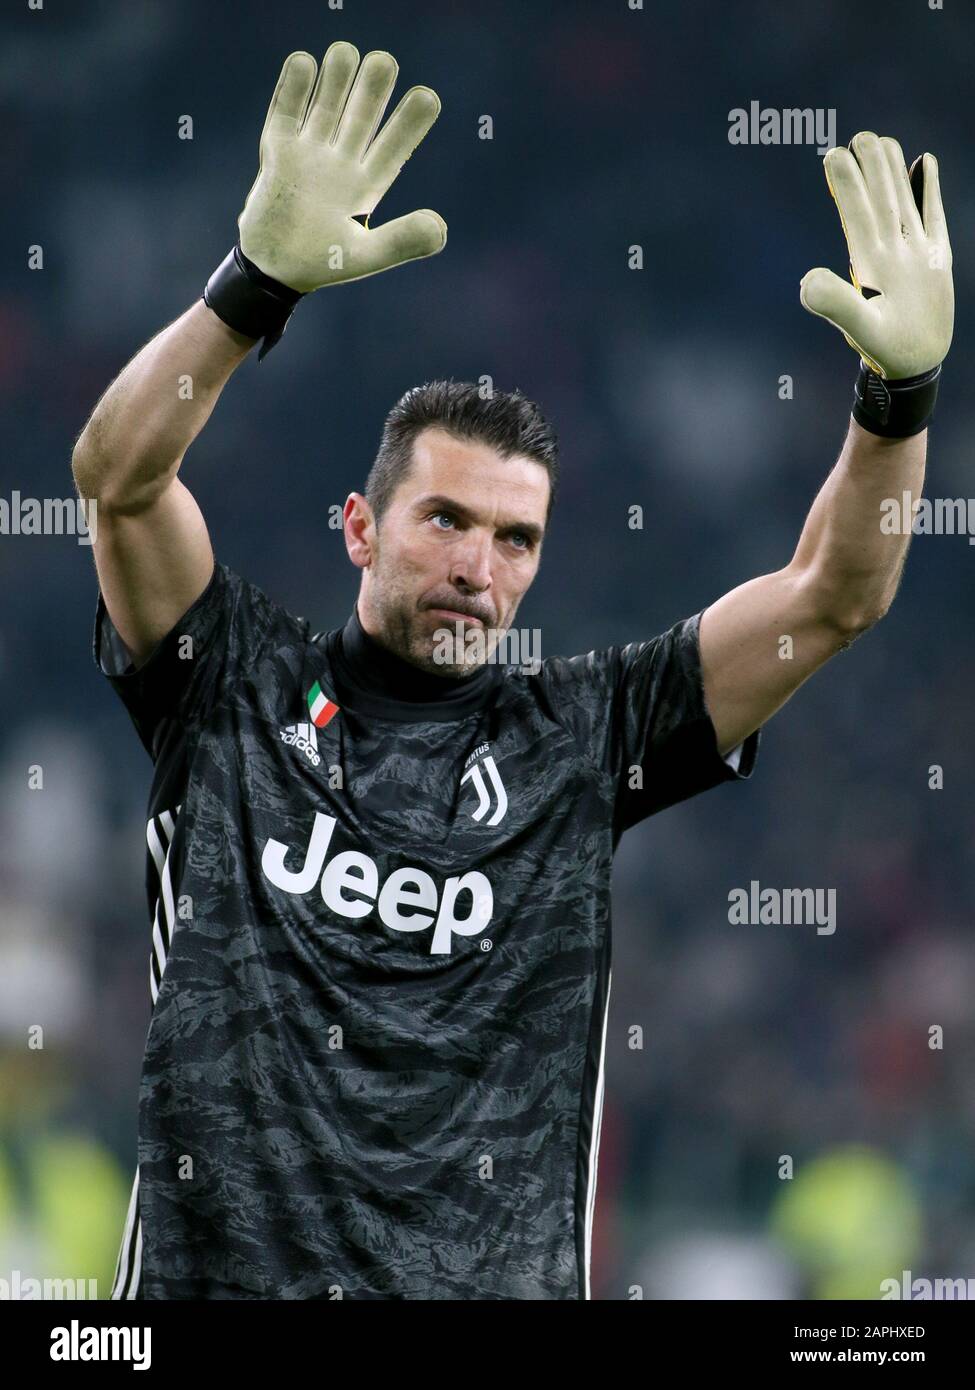 Turin, Italy. 22nd Jan, 2020. 77 gianluigi buffon (juventus) during Juventus  vs Roma, Italian TIM Cup Championship in Turin, Italy, January 22 2020  Credit: Independent Photo Agency/Alamy Live News Stock Photo - Alamy